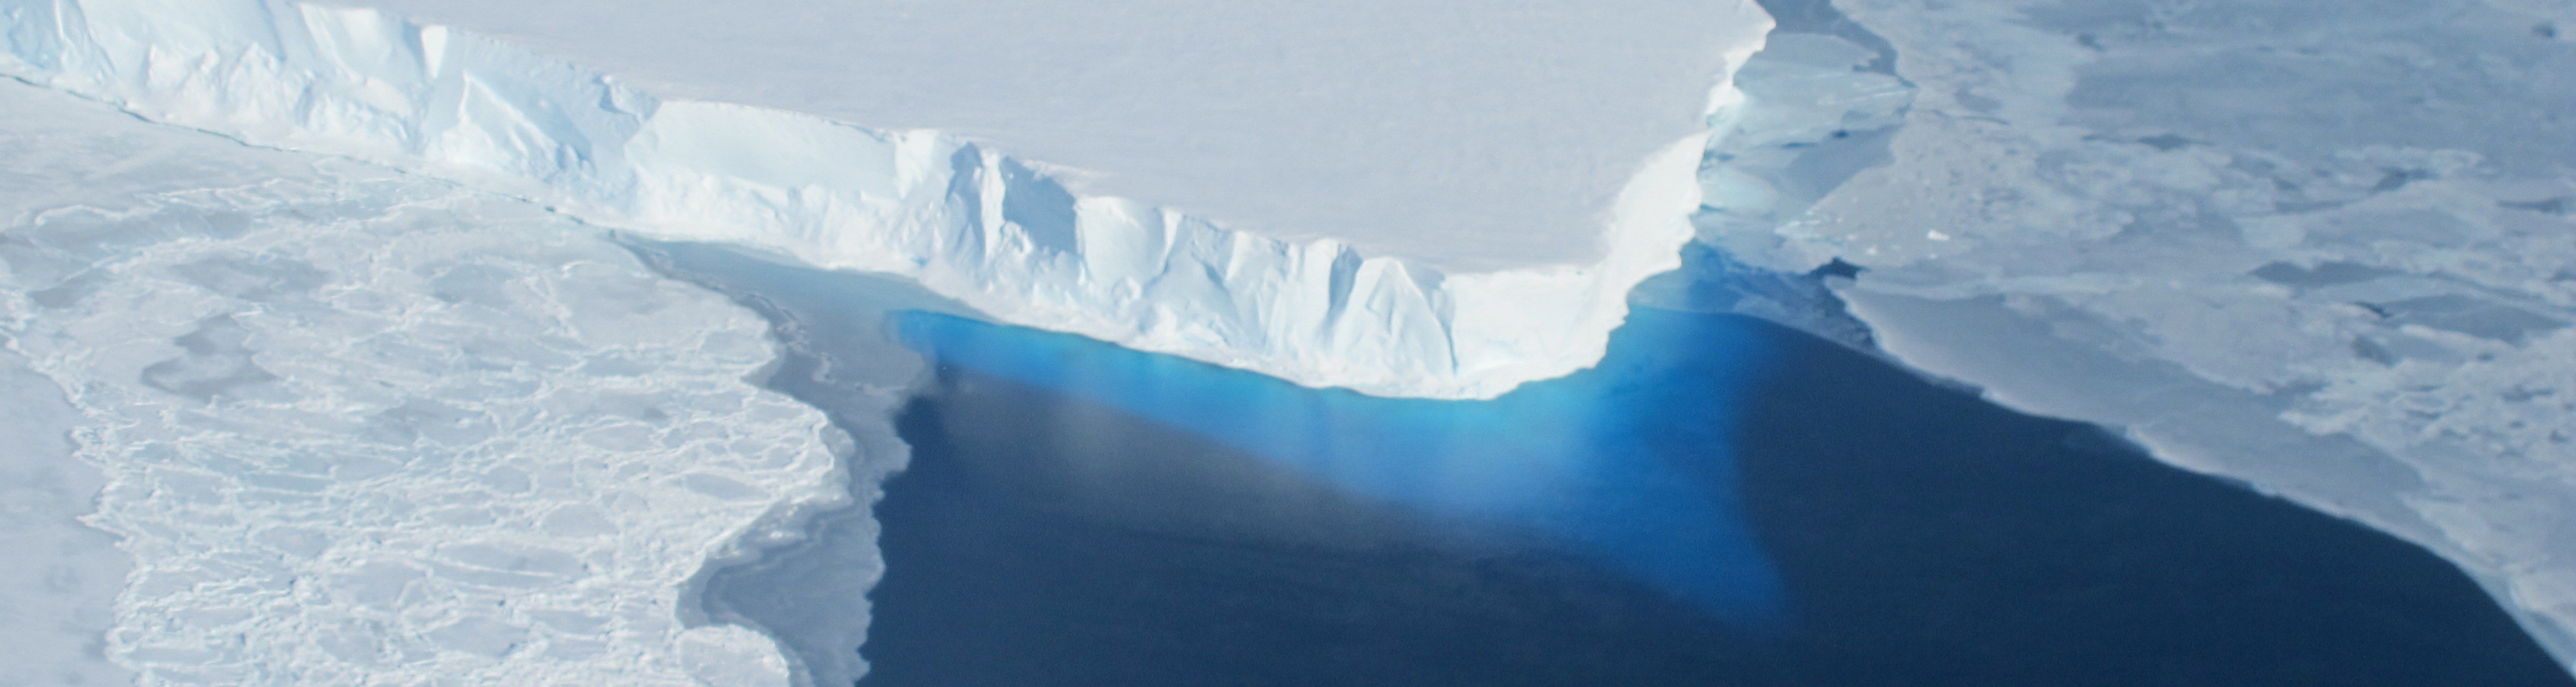 An ice cliff above the ocean adjacent to Thwaites Glacier in West Antarctica. Credits: NASA Public domain, via Wikimedia Commons.